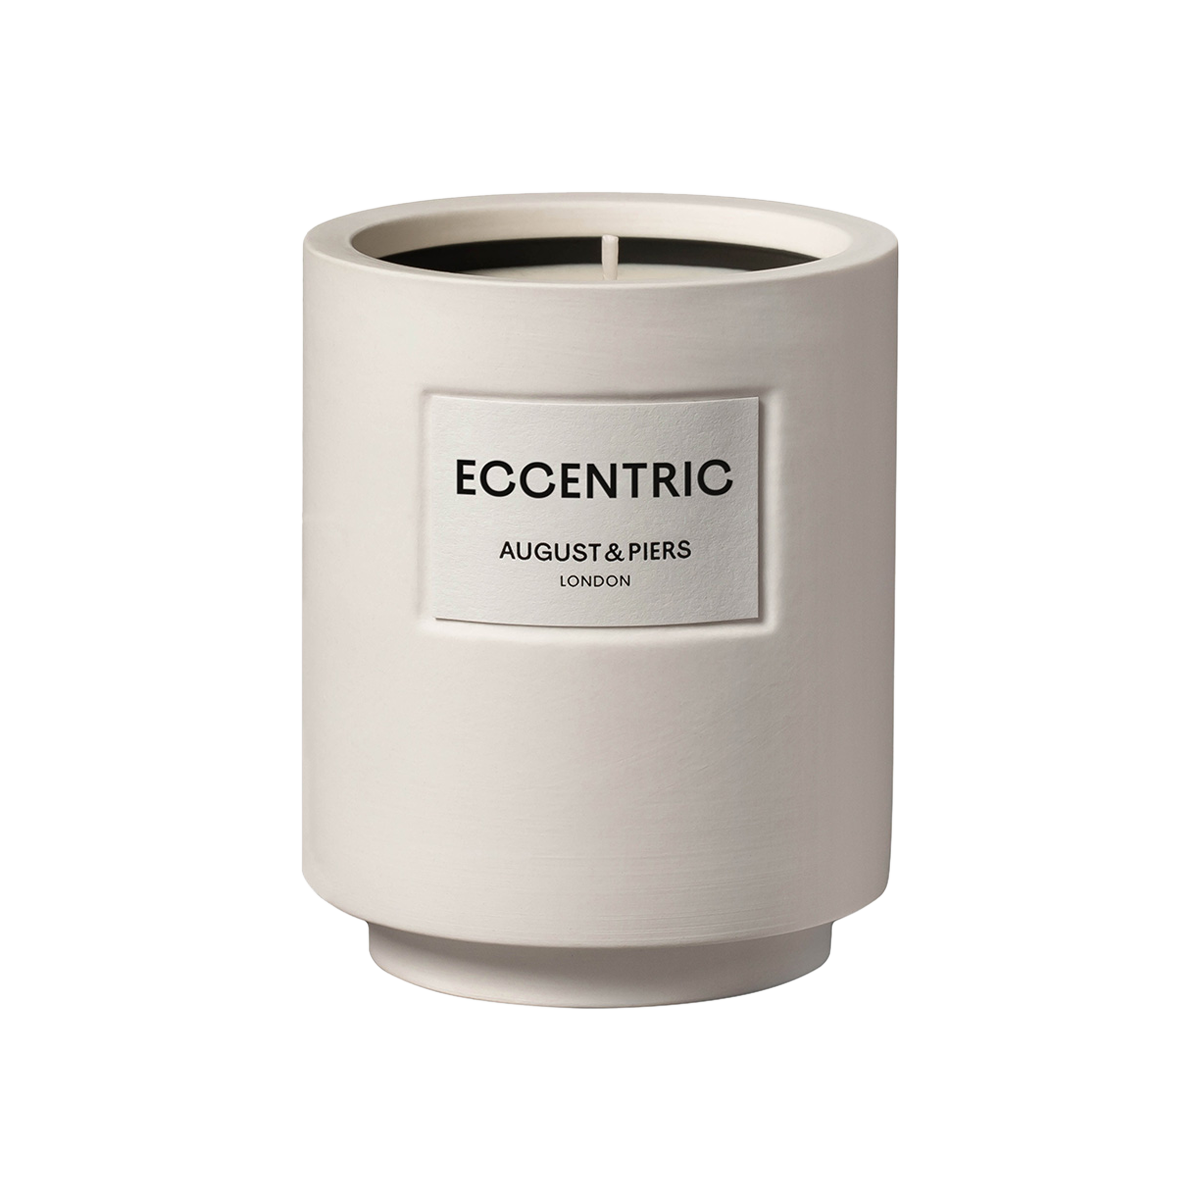 AUGUST&PIERS - Eccentric Scented Candle